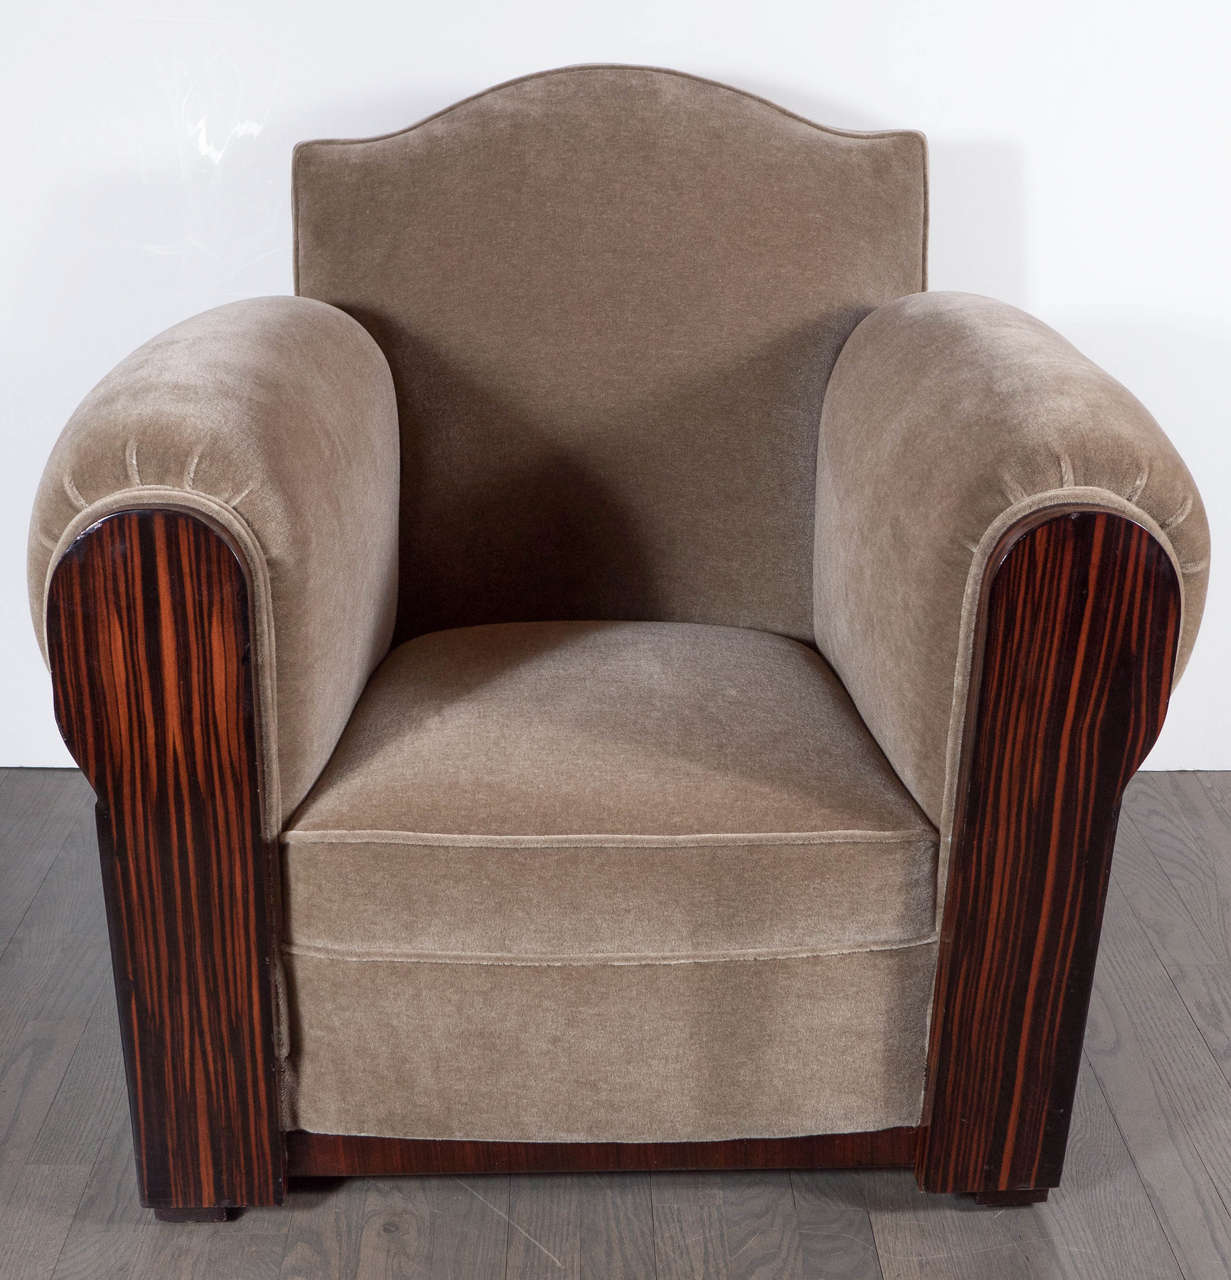 These gorgeous chairs feature bookmatched Macassar wrapped sides, base and arm front details. They have been newly upholstered in a deep tobacco mohair fabric. They are a Classic Art Deco club chair design with rolled arms and a scrolled design